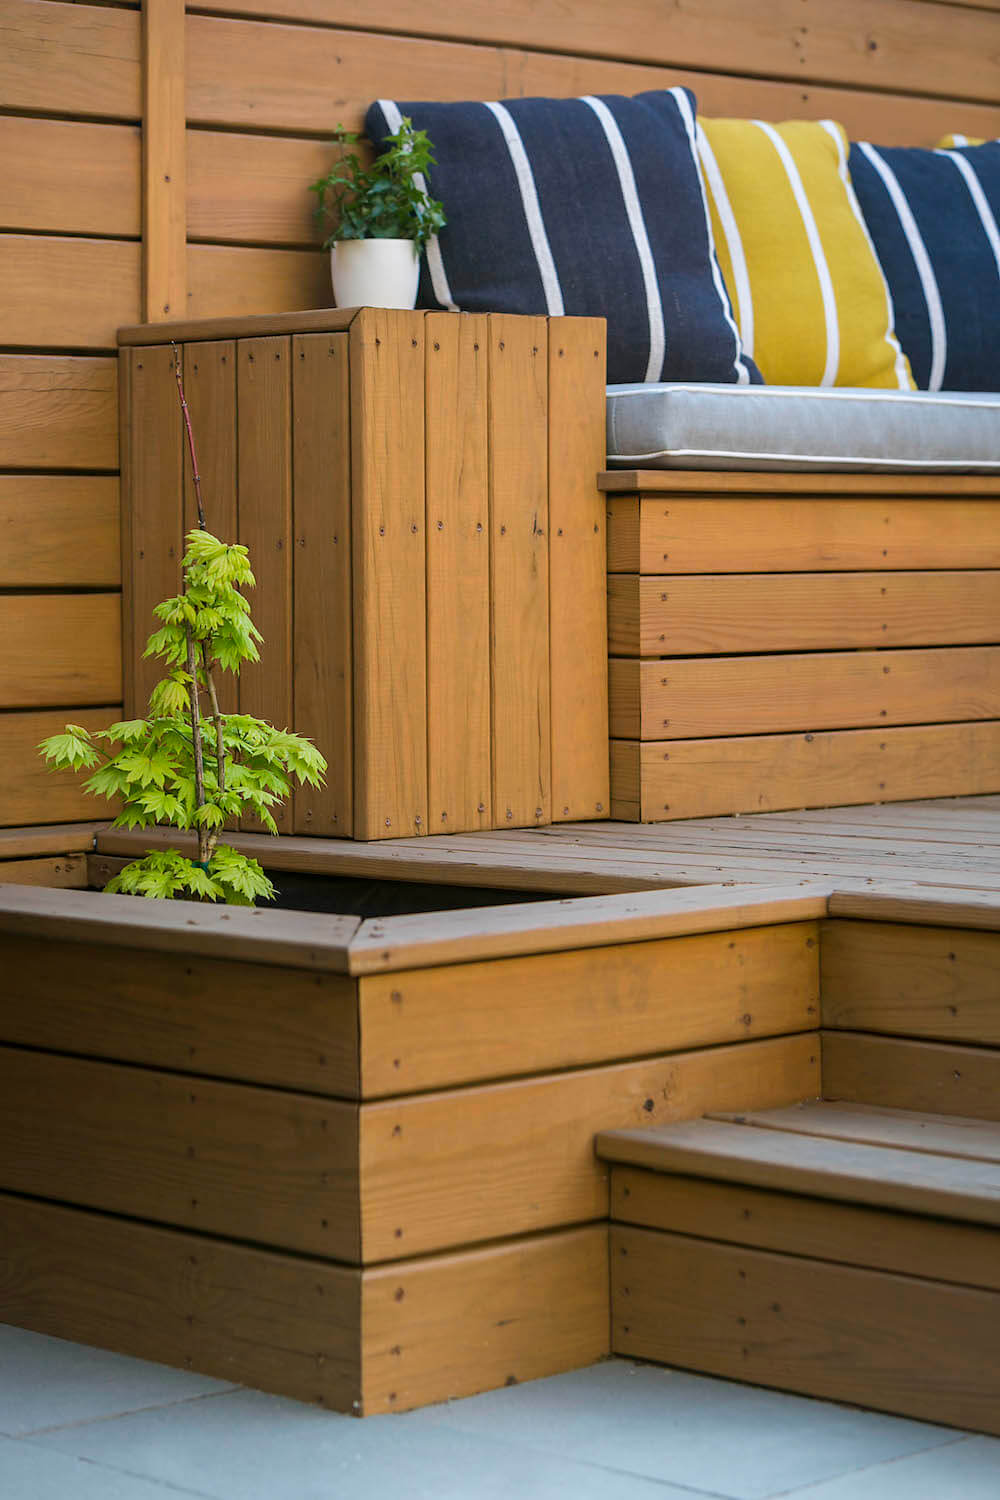 Image of an outdoor planter and bench seat